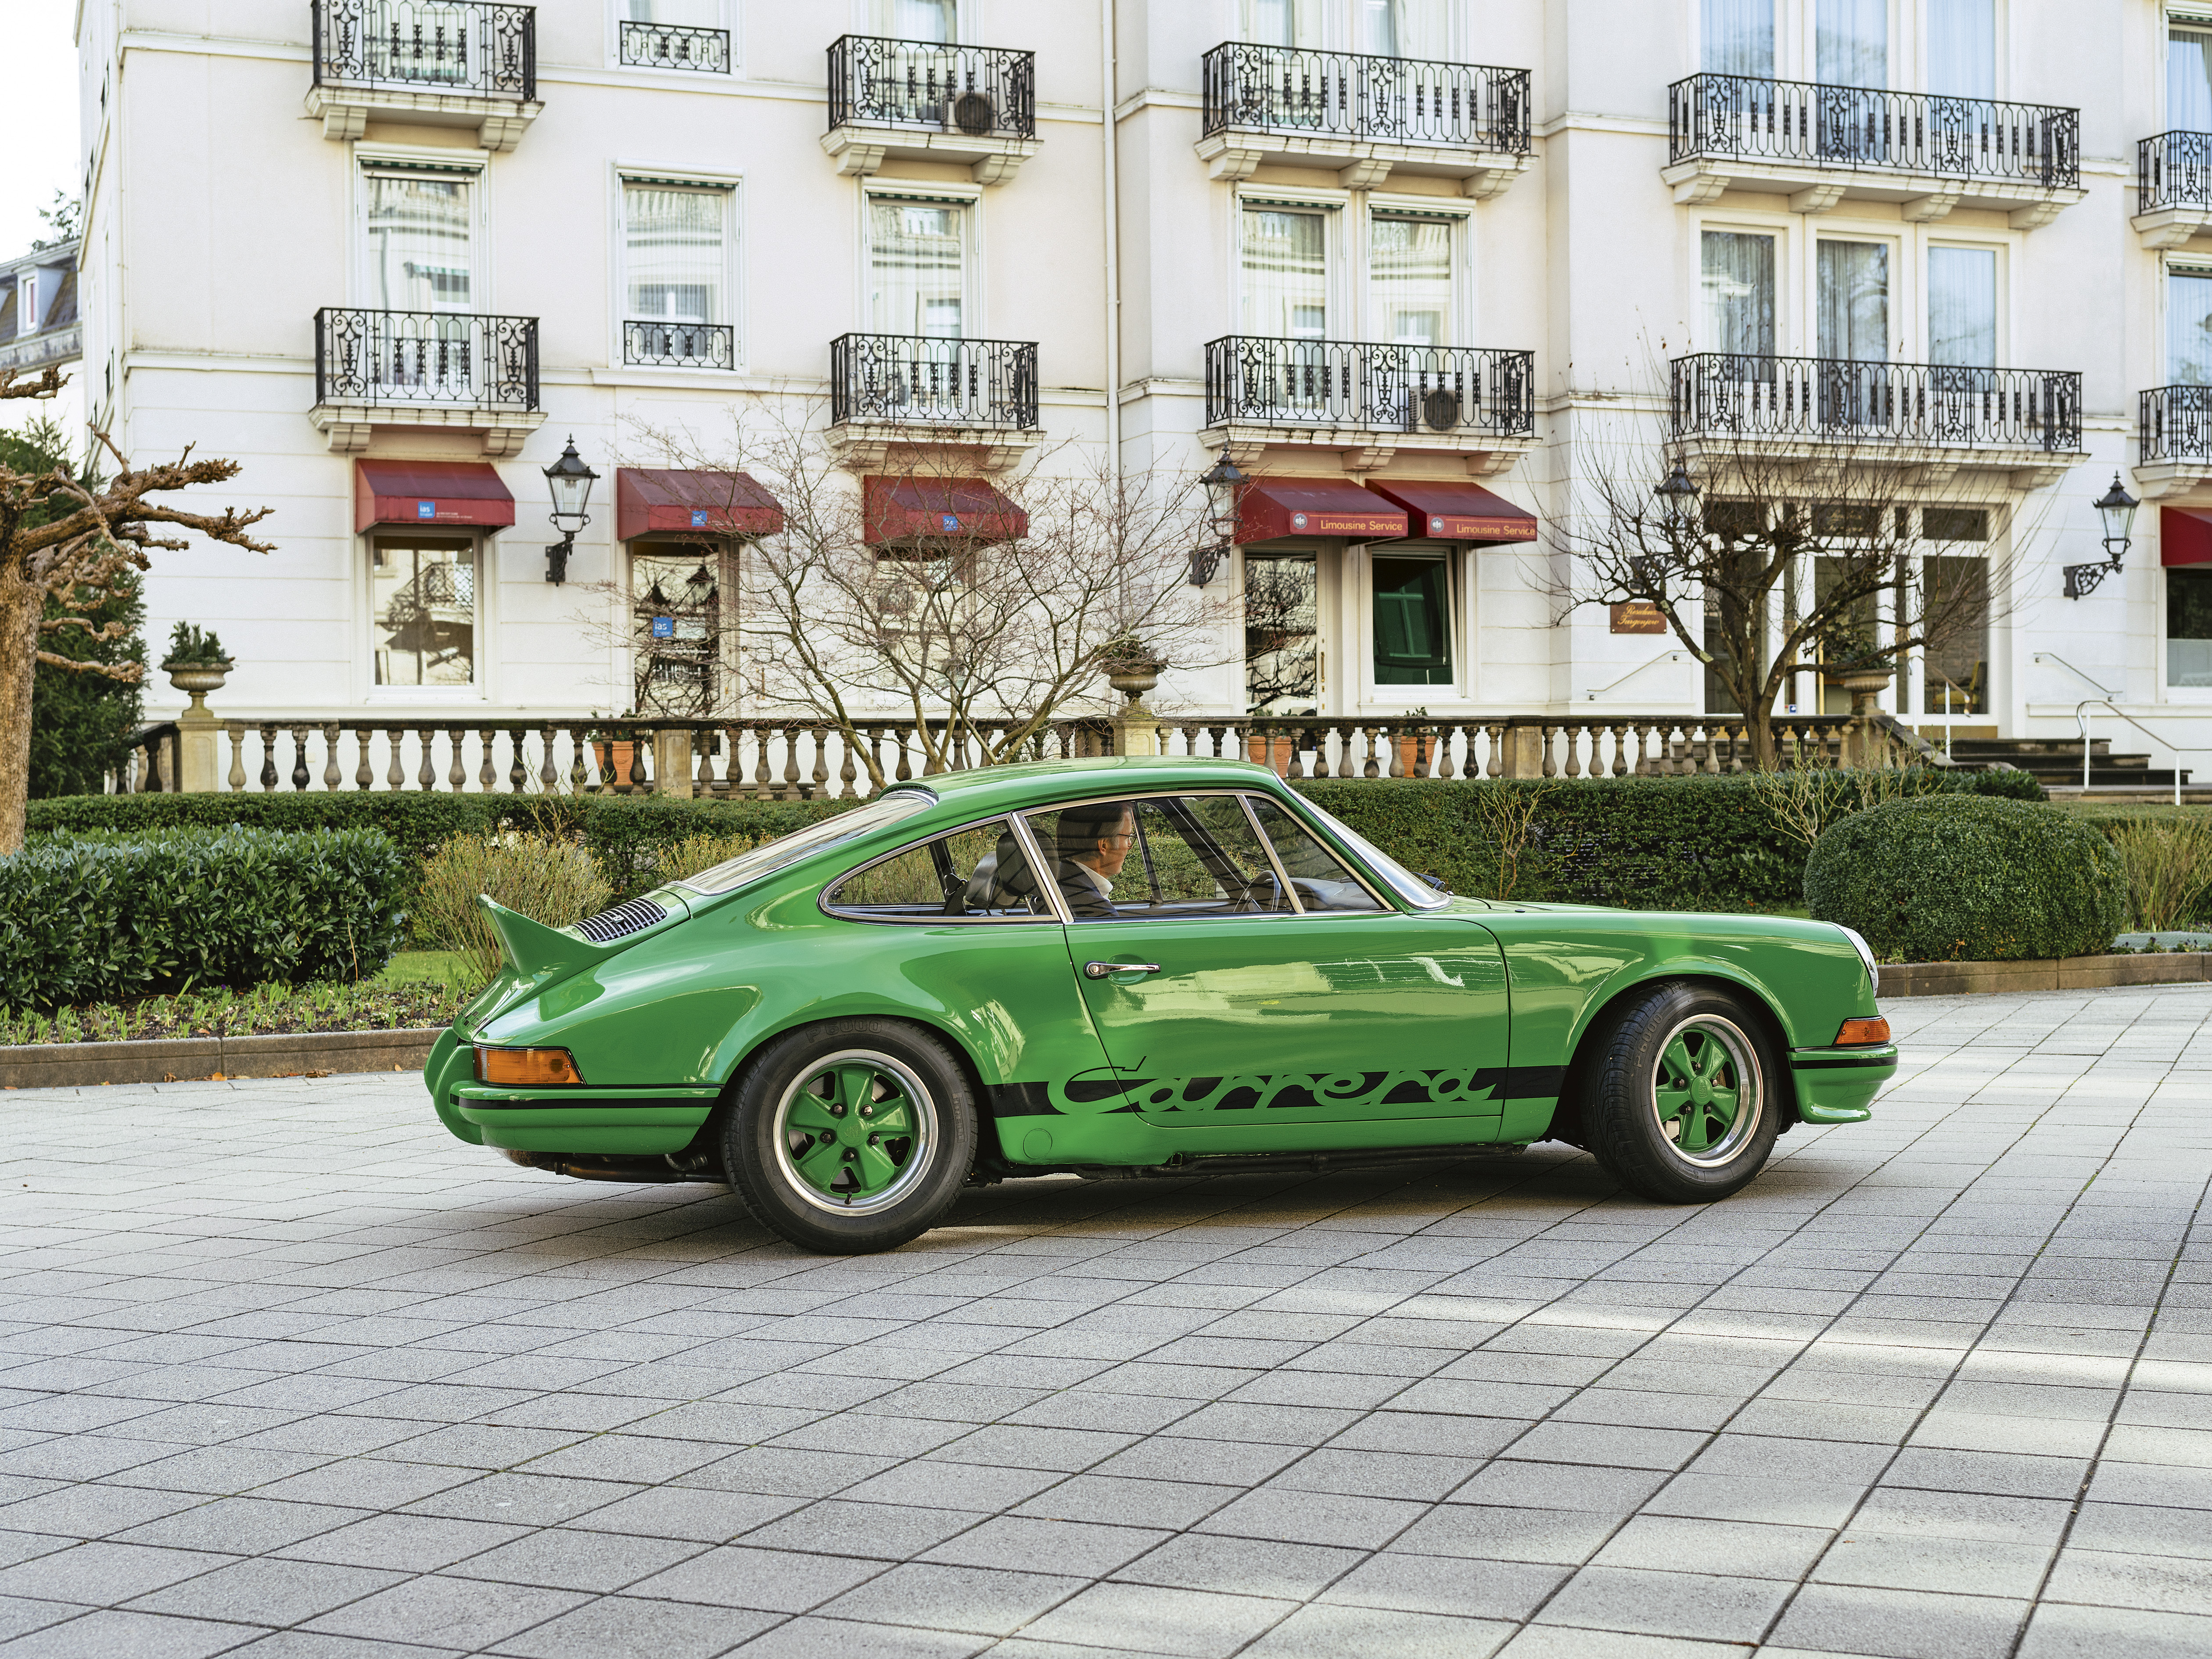 Green Porsche 911 Carrera RS 2.7 in front of apartments